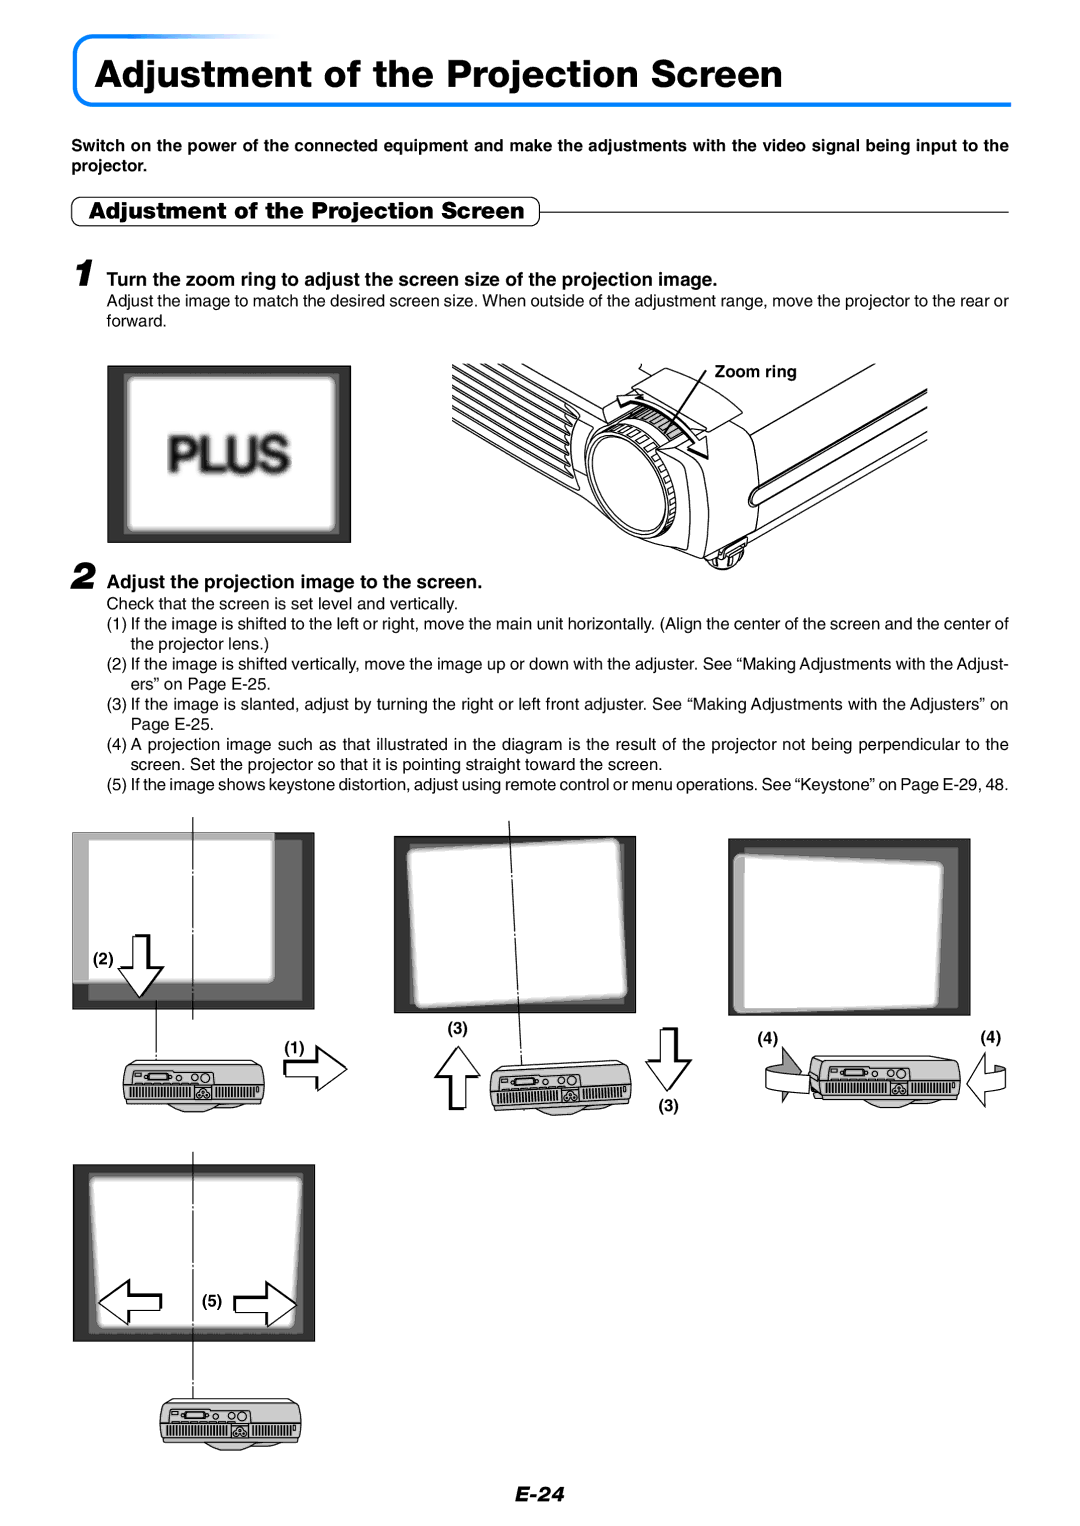 PLUS Vision U4-237 user manual Adjustment of the Projection Screen, Adjust the projection image to the screen, Zoom ring 